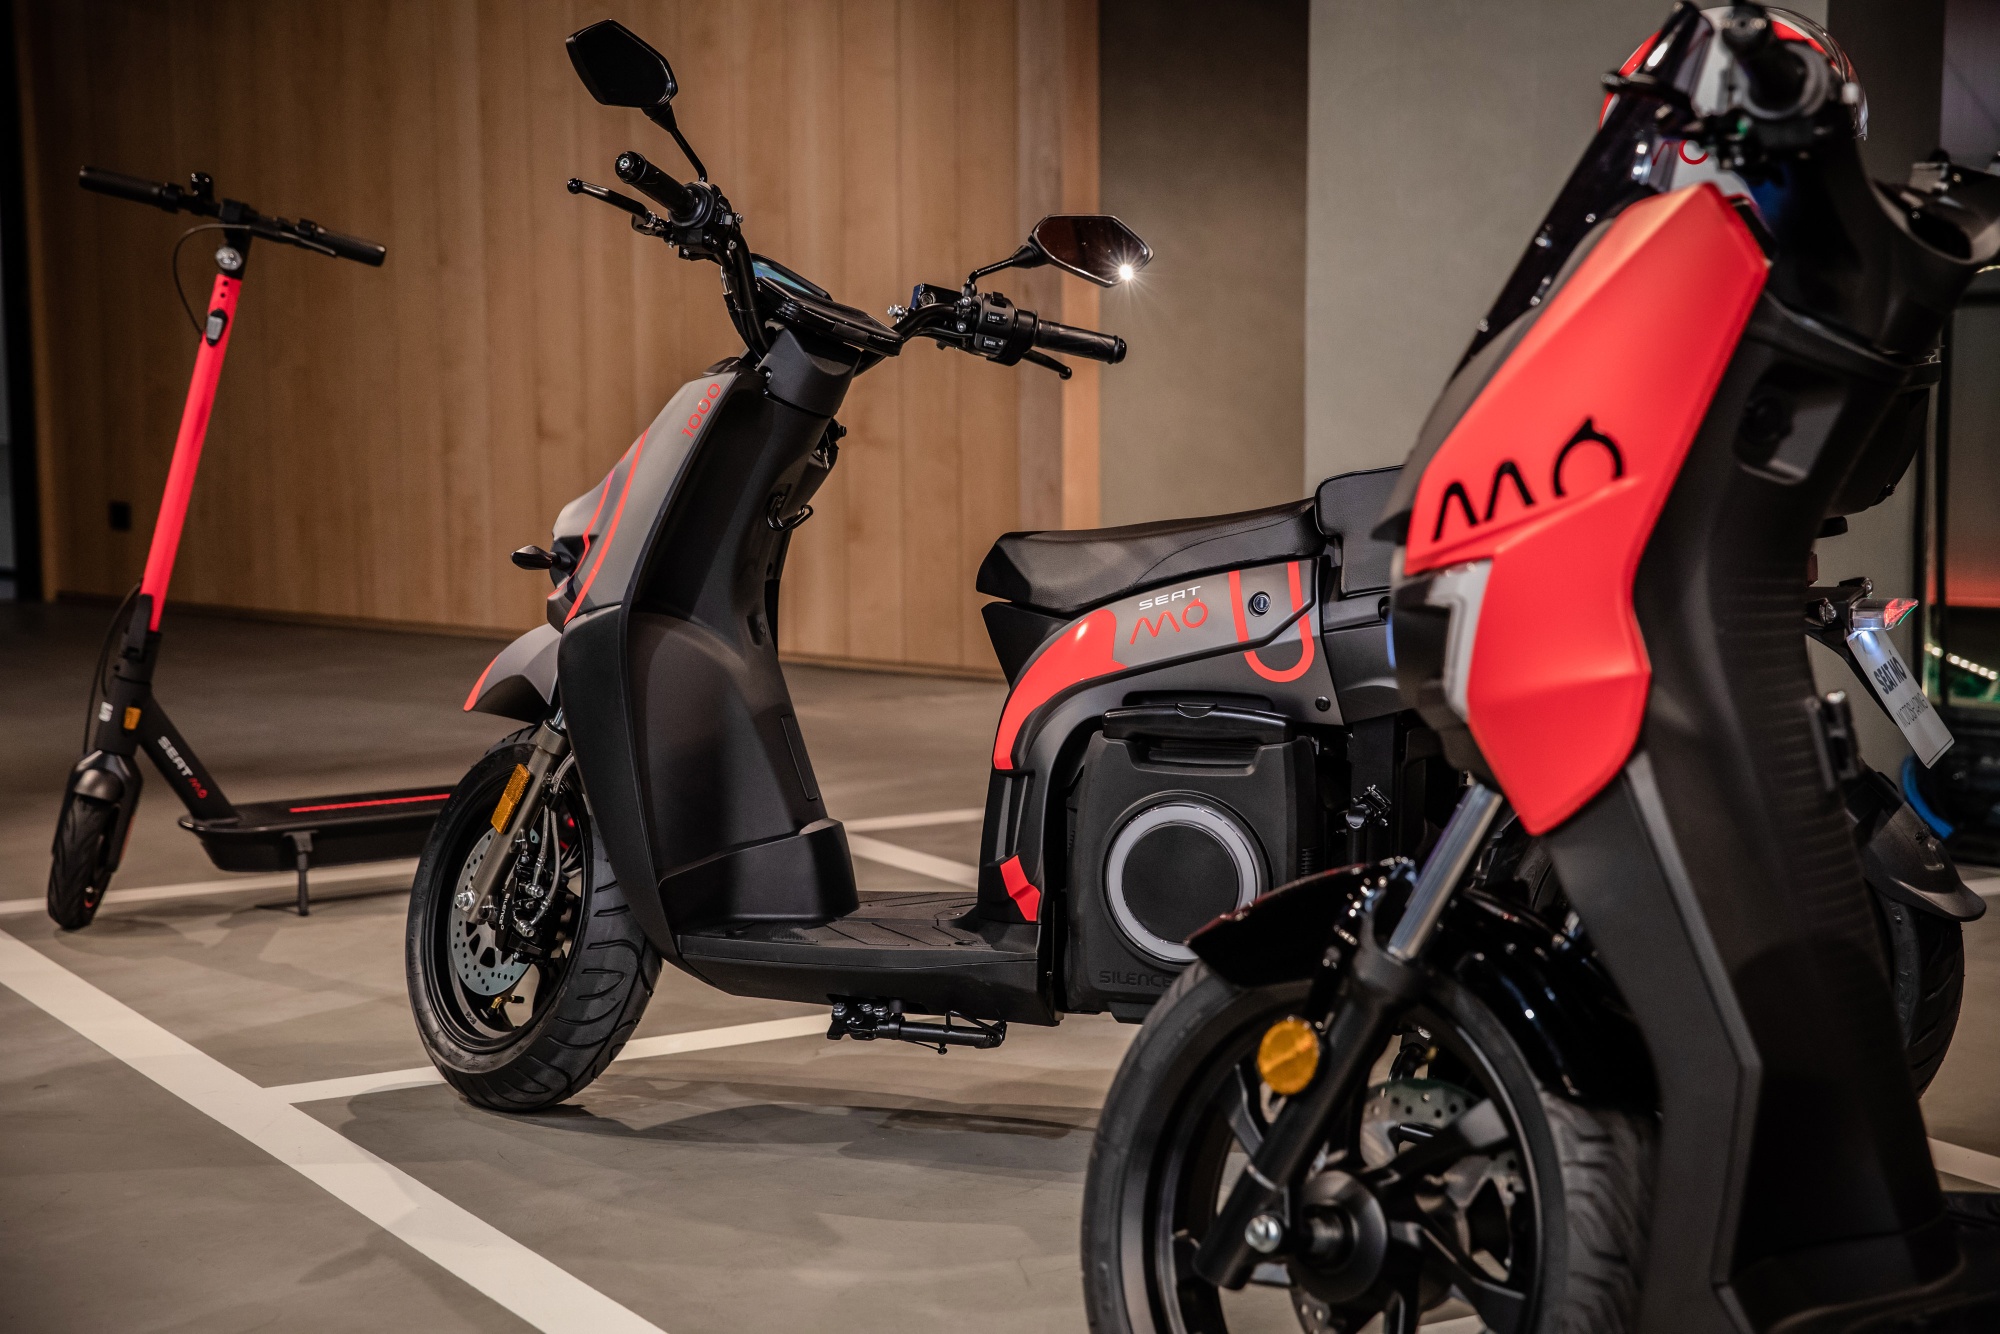 Hyperdrive Daily: The EV Revolution Rides on Two Wheels - Bloomberg